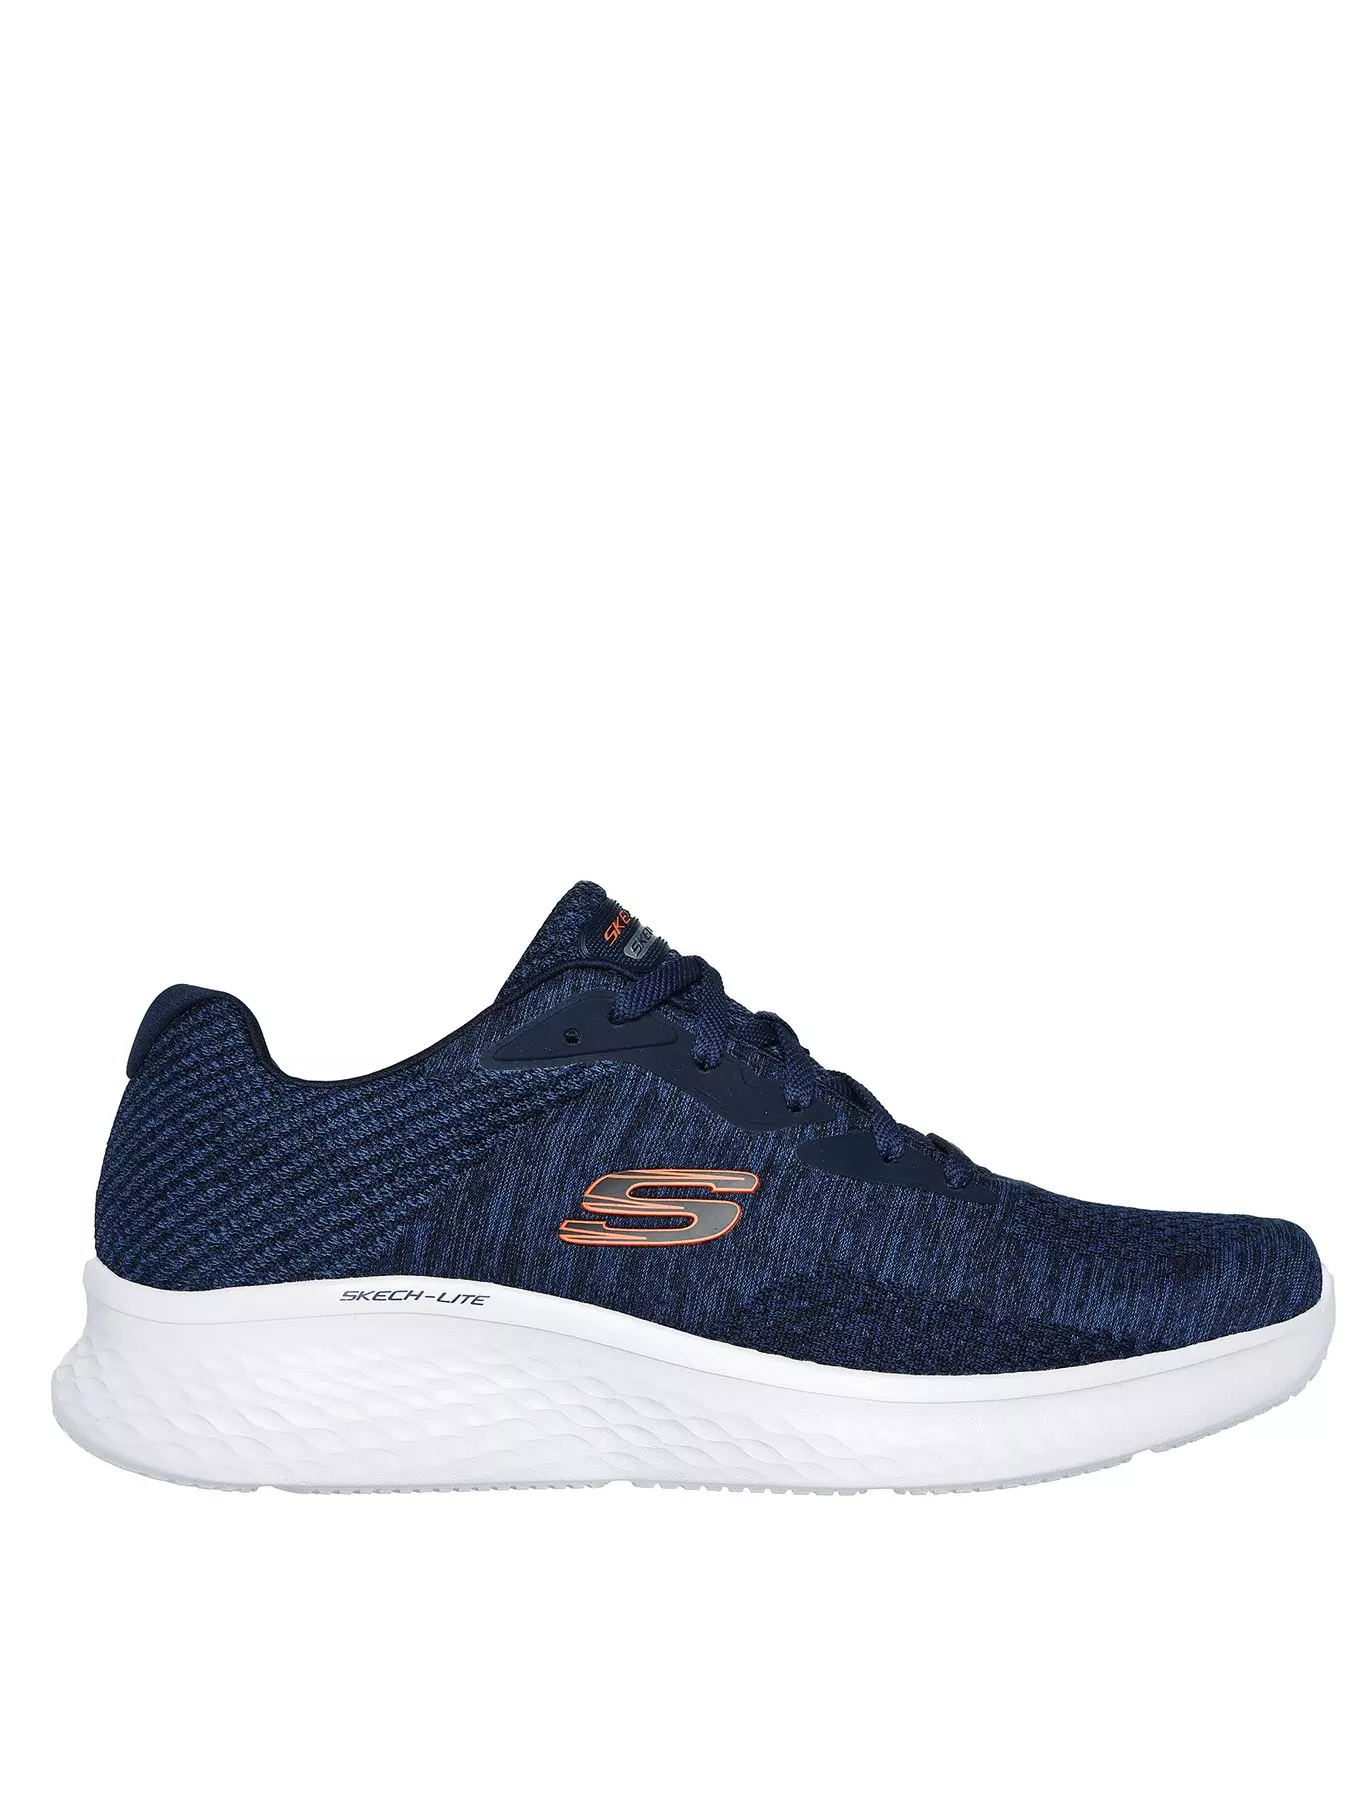 Tommy Hilfiger Tanga 85 navy - ESD Store fashion, footwear and accessories  - best brands shoes and designer shoes